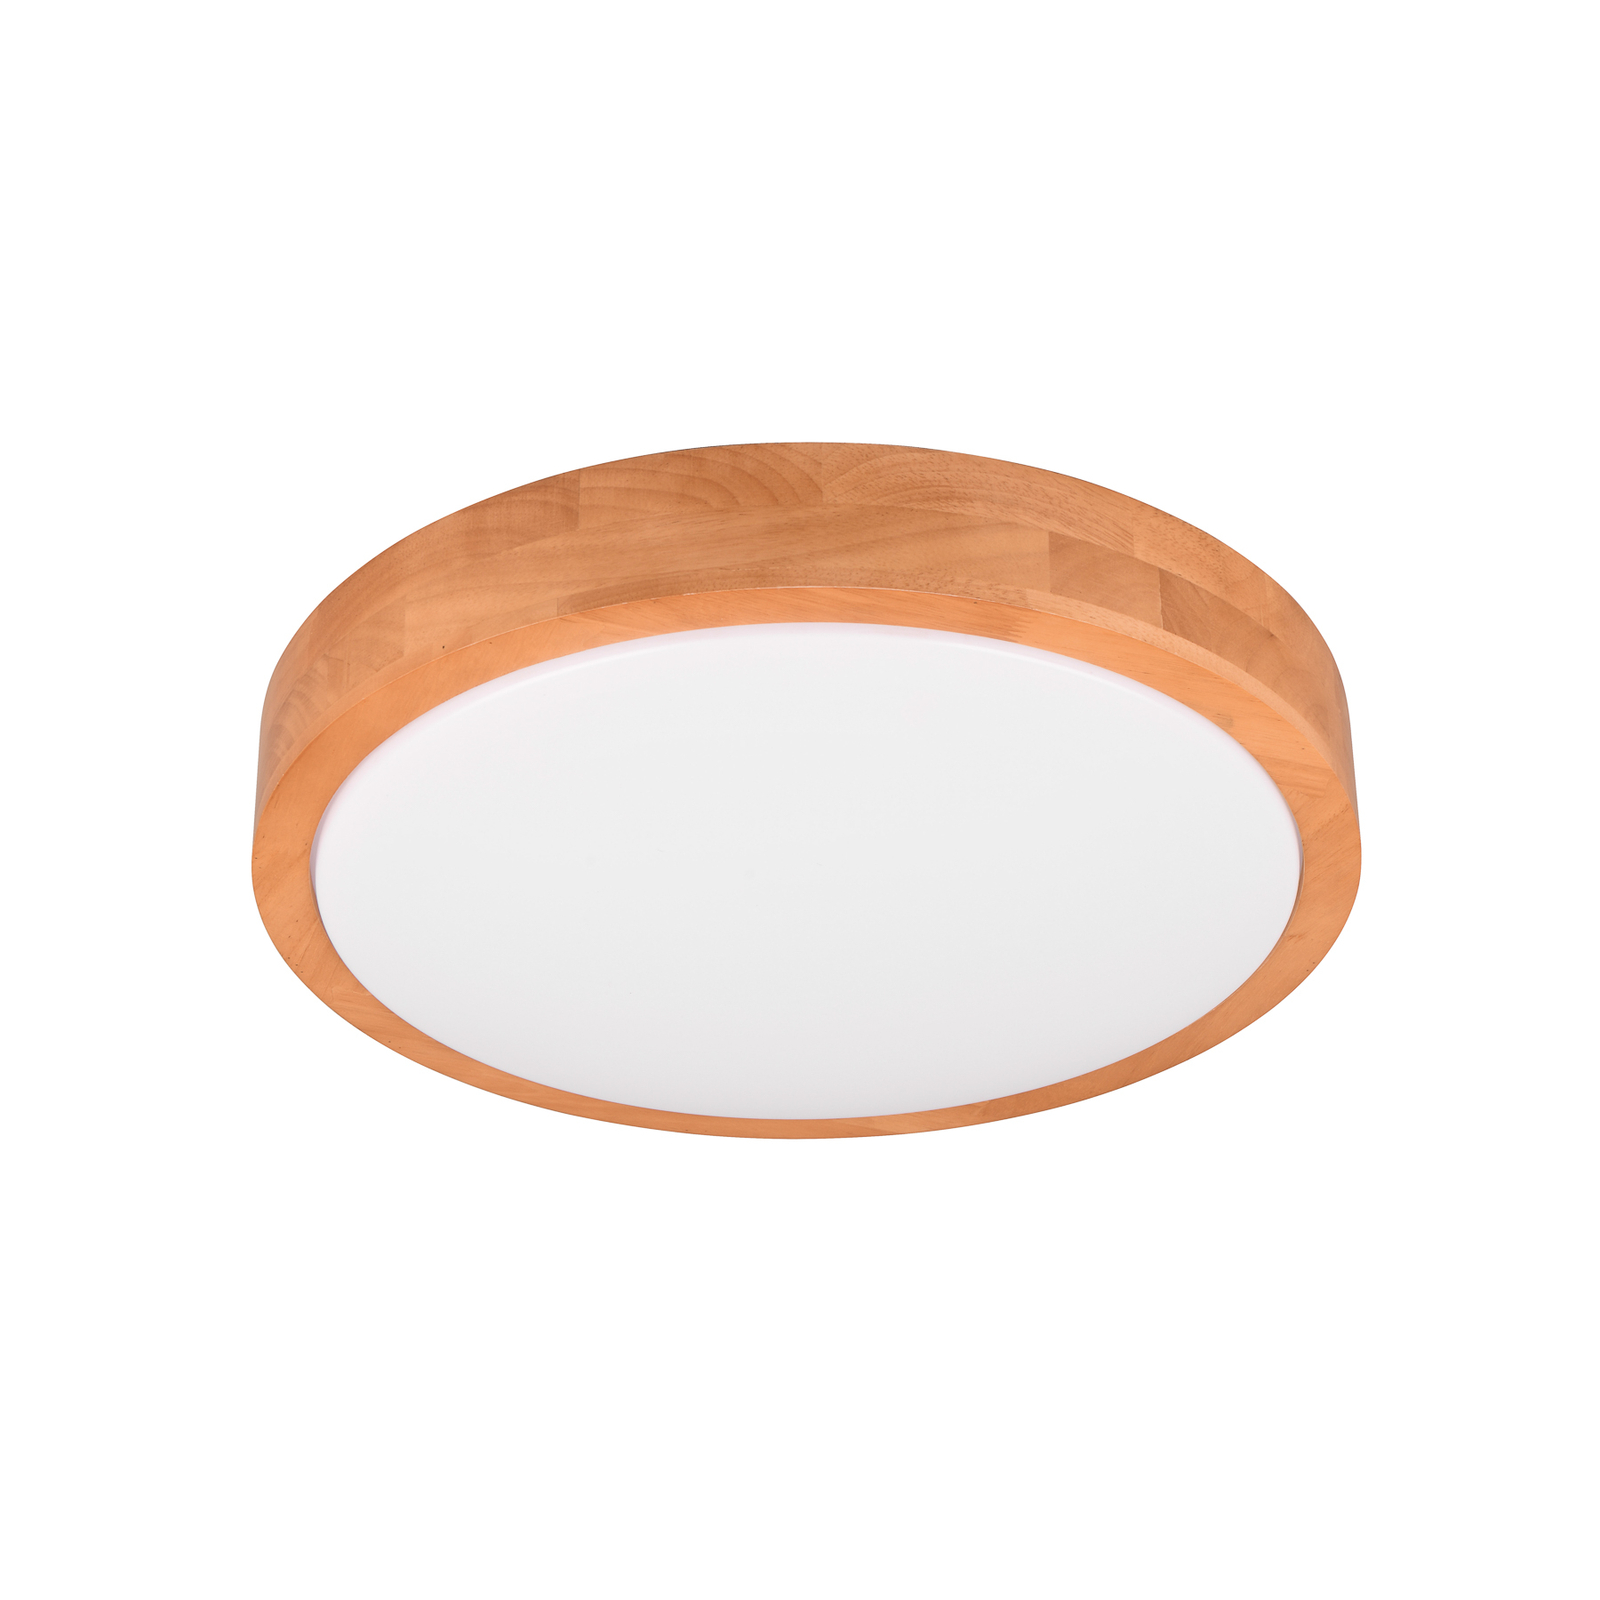 LED ceiling light Iseo, wood-coloured, Ø 40 cm, dimmable, wood